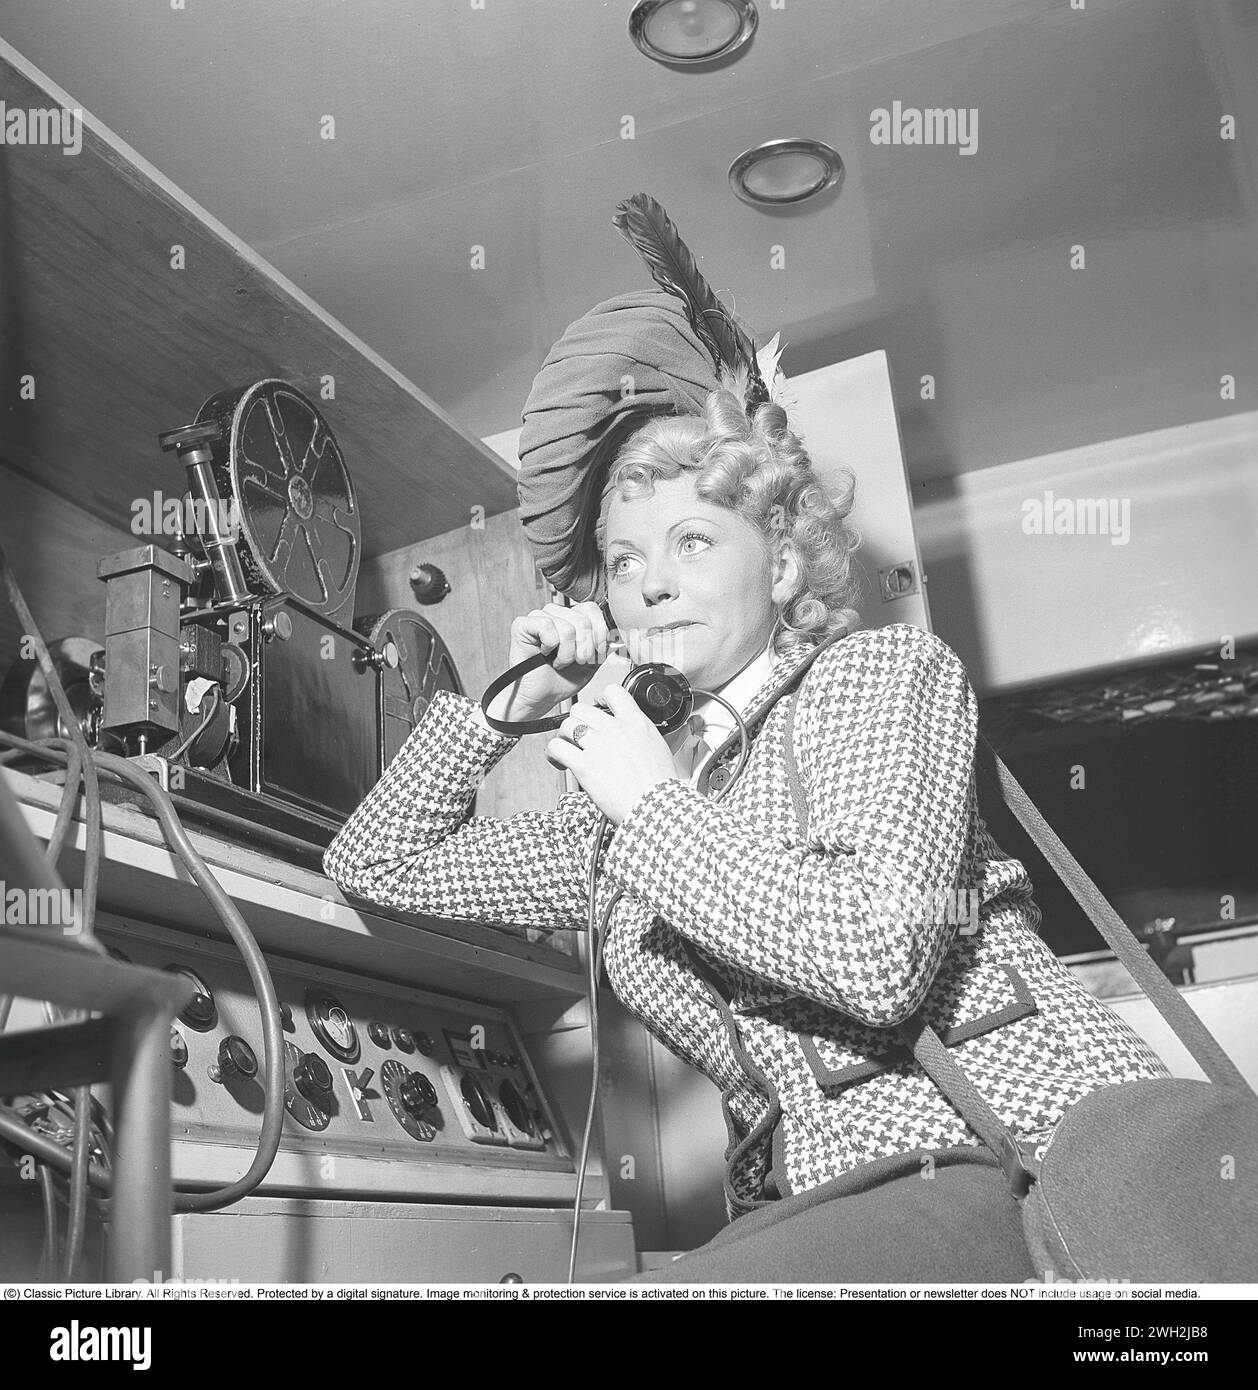 Women's fashion in the 1940s. A young woman dressed in a plaid patterned jacket and a matching hat. Pictured listening to something on the earphones. She is actress Dioris Söderström. Sweden 1945.  Kristoffersson Ref P73-5 Stock Photo